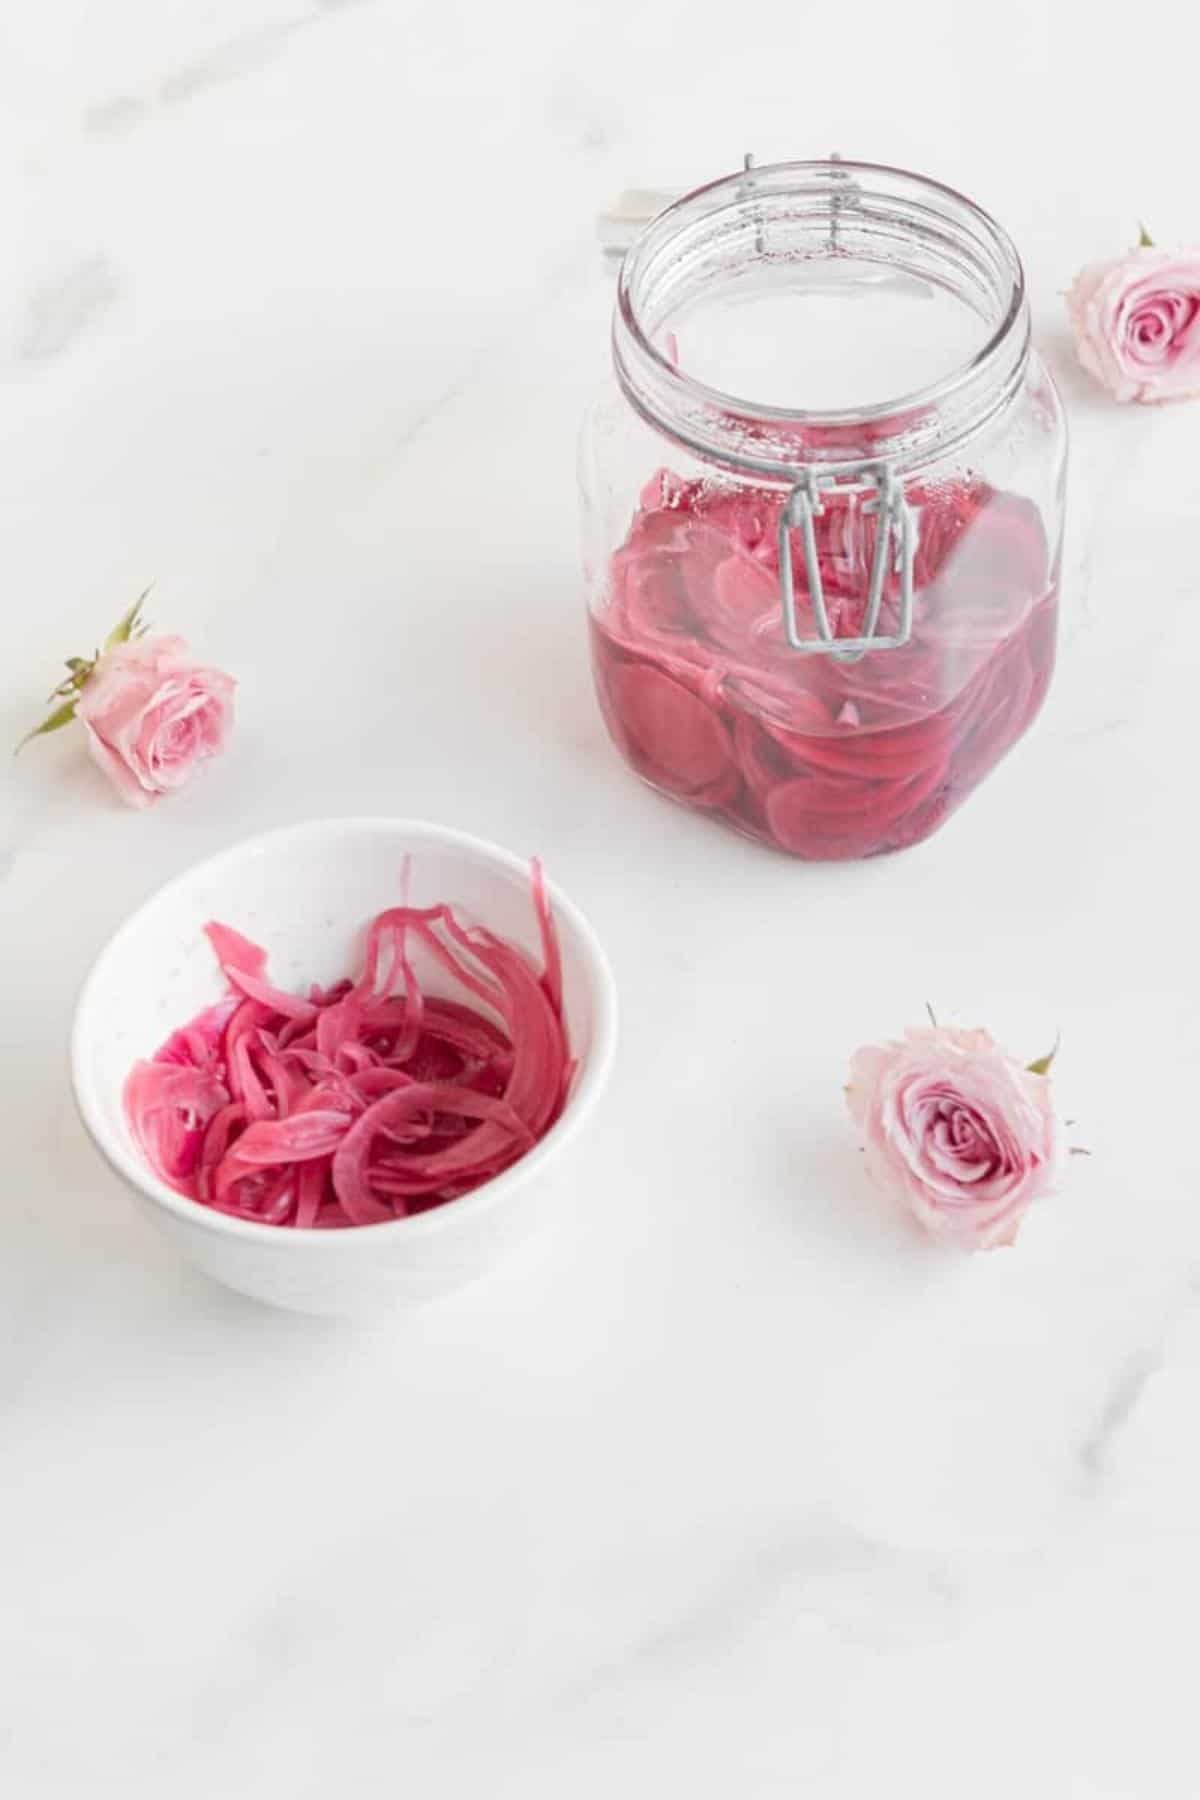 quick pickled onions in a jar and in a bowl with flowers and marble